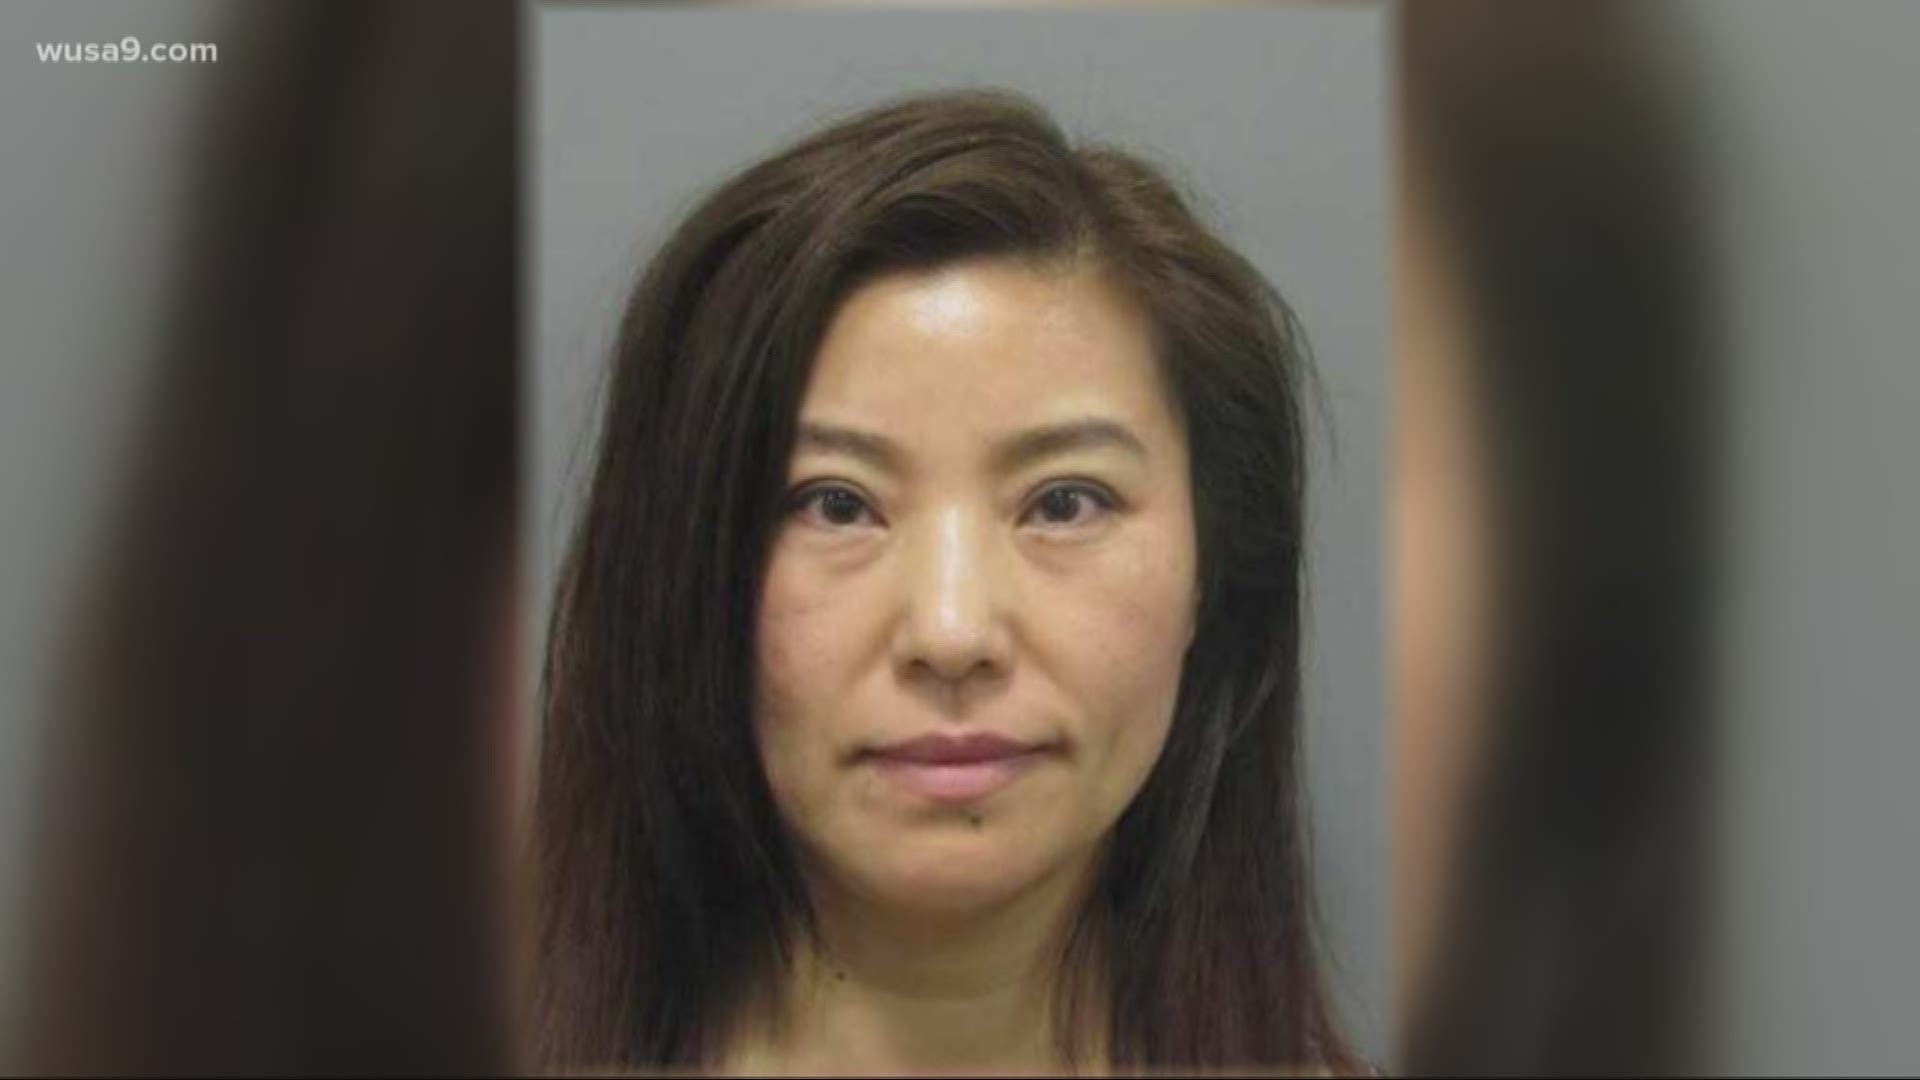 A spa owner out of Montgomery County is under arrest -- accused of operating her spa as a "house of prostitution." Investigators say the mother of two had a long list of clients paying for illegal sex acts.